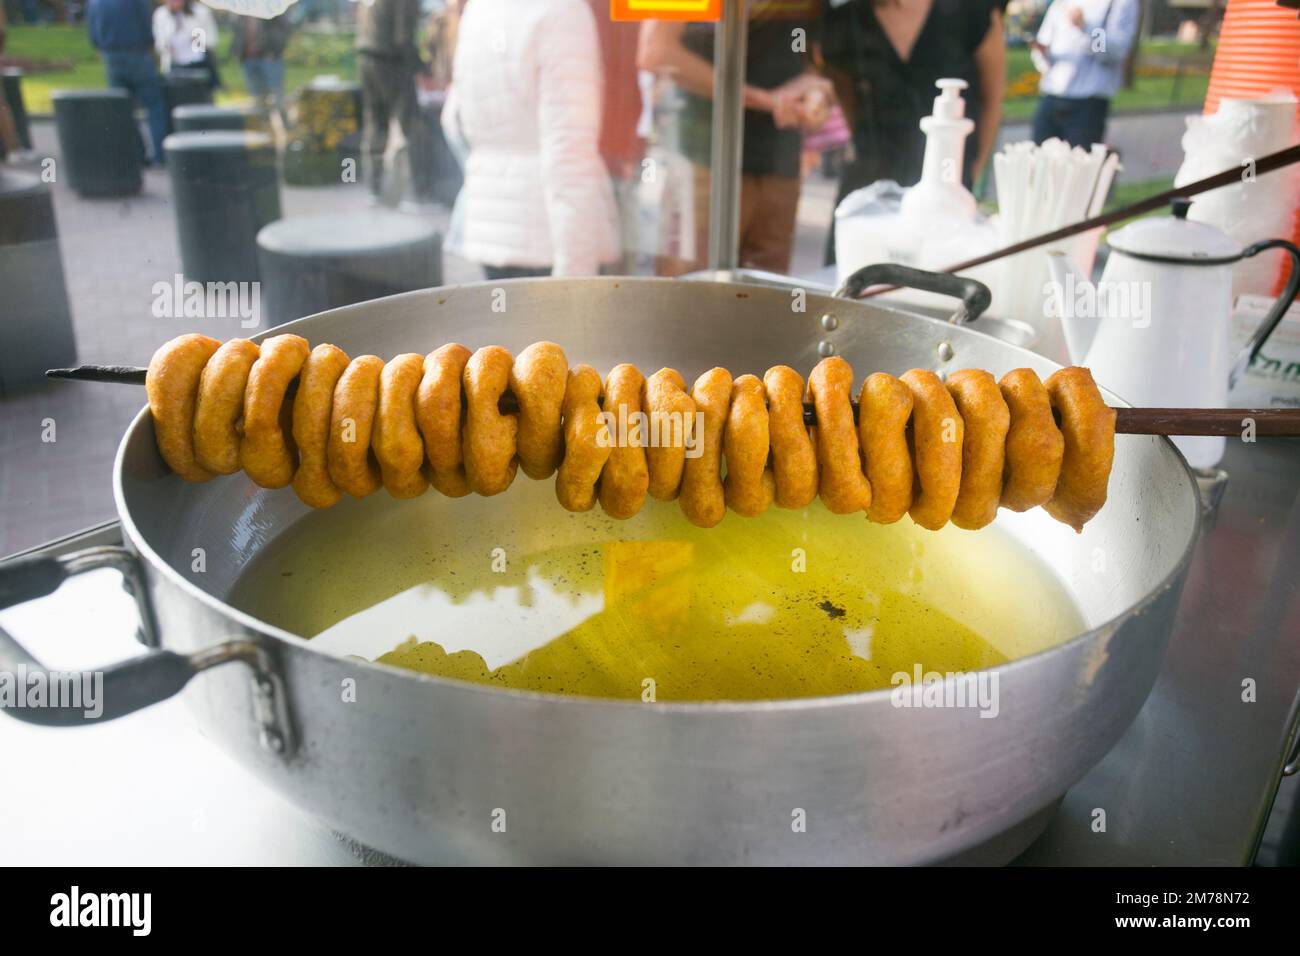 Picarones are ring-shaped fried sweets made with wheat flour dough mixed with squash, and sometimes sweet potato, bathed in flavored chancaca honey. Stock Photo